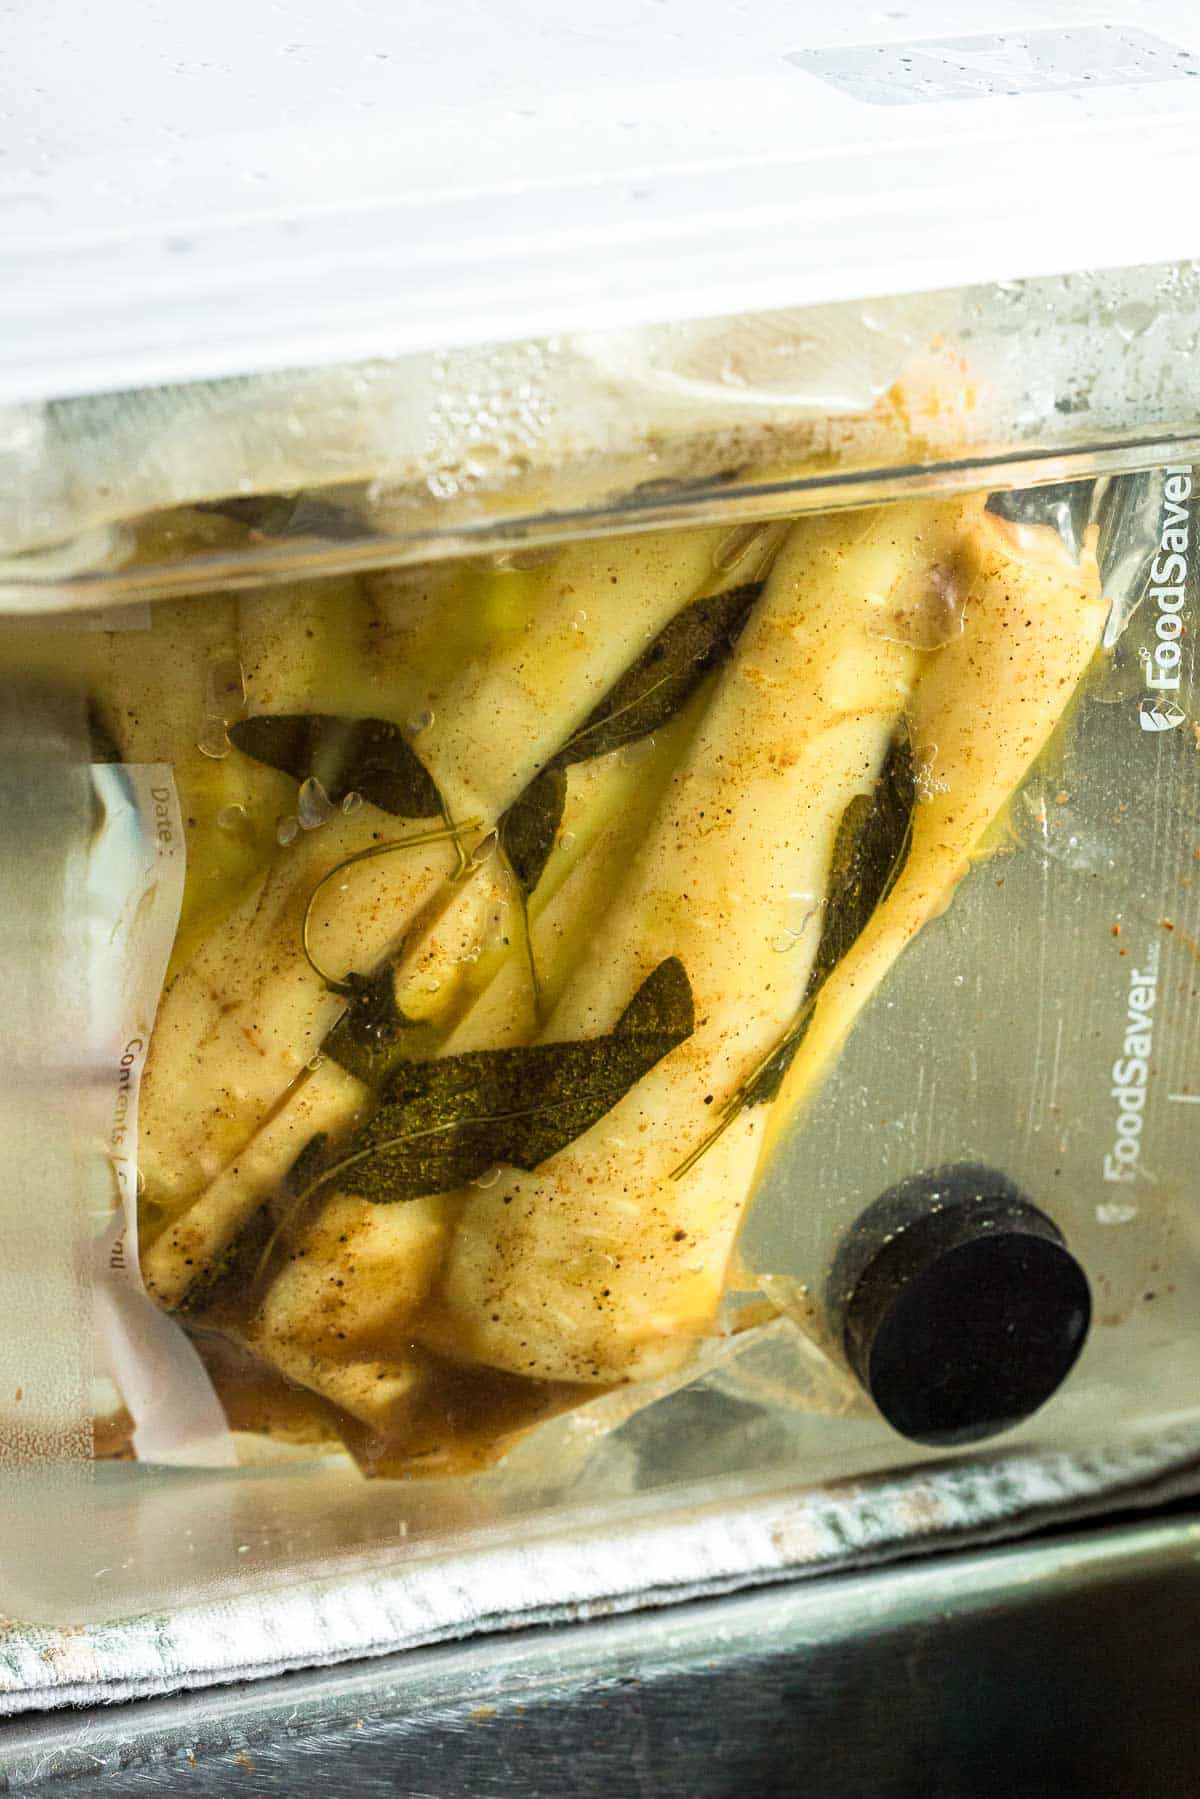 parsnips being cooked in a bag in a water bath